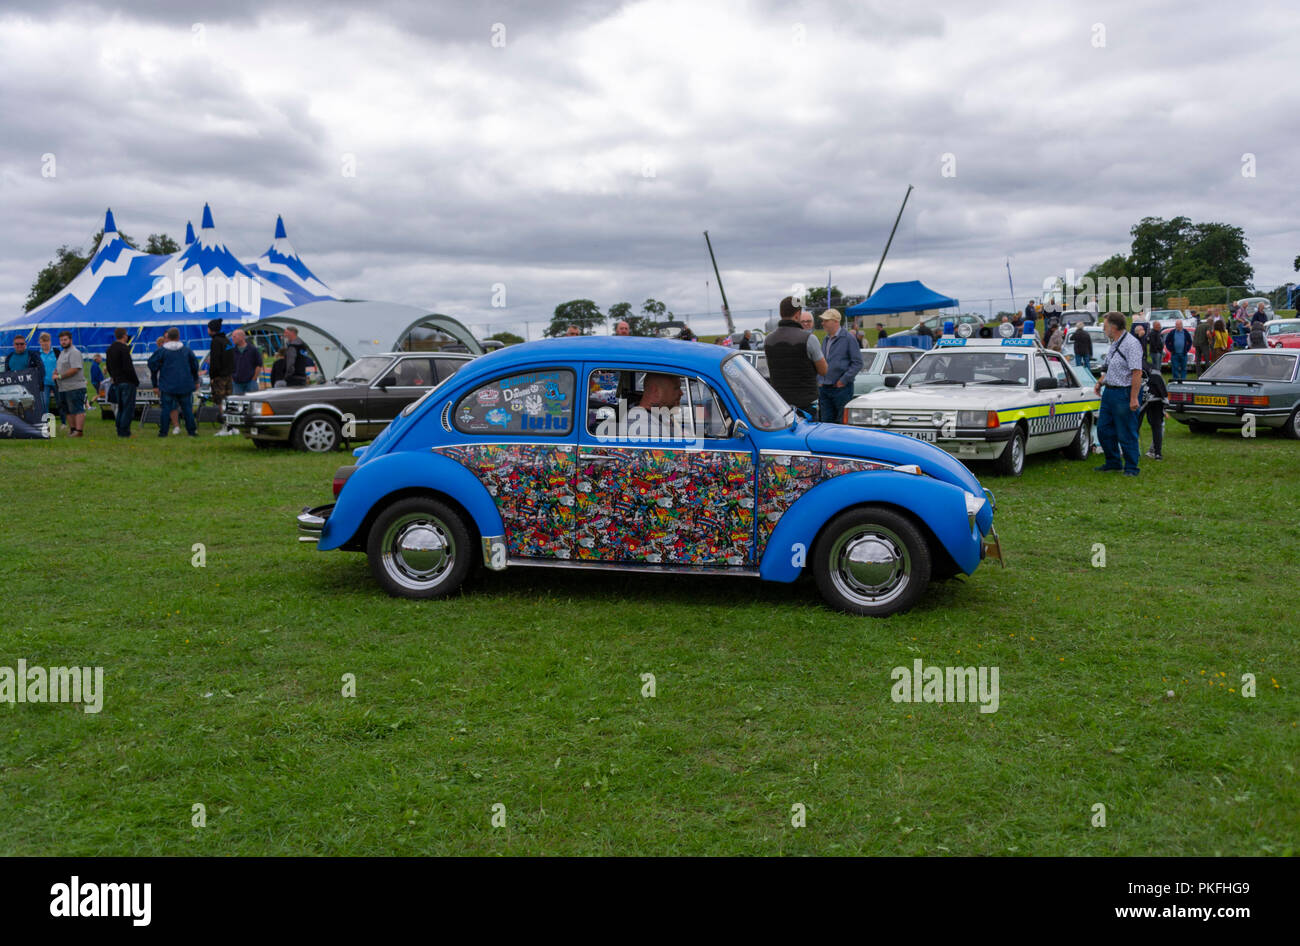 VW Beetle with cartoons painted on the side at Knebworth House Knebworth UK Stock Photo